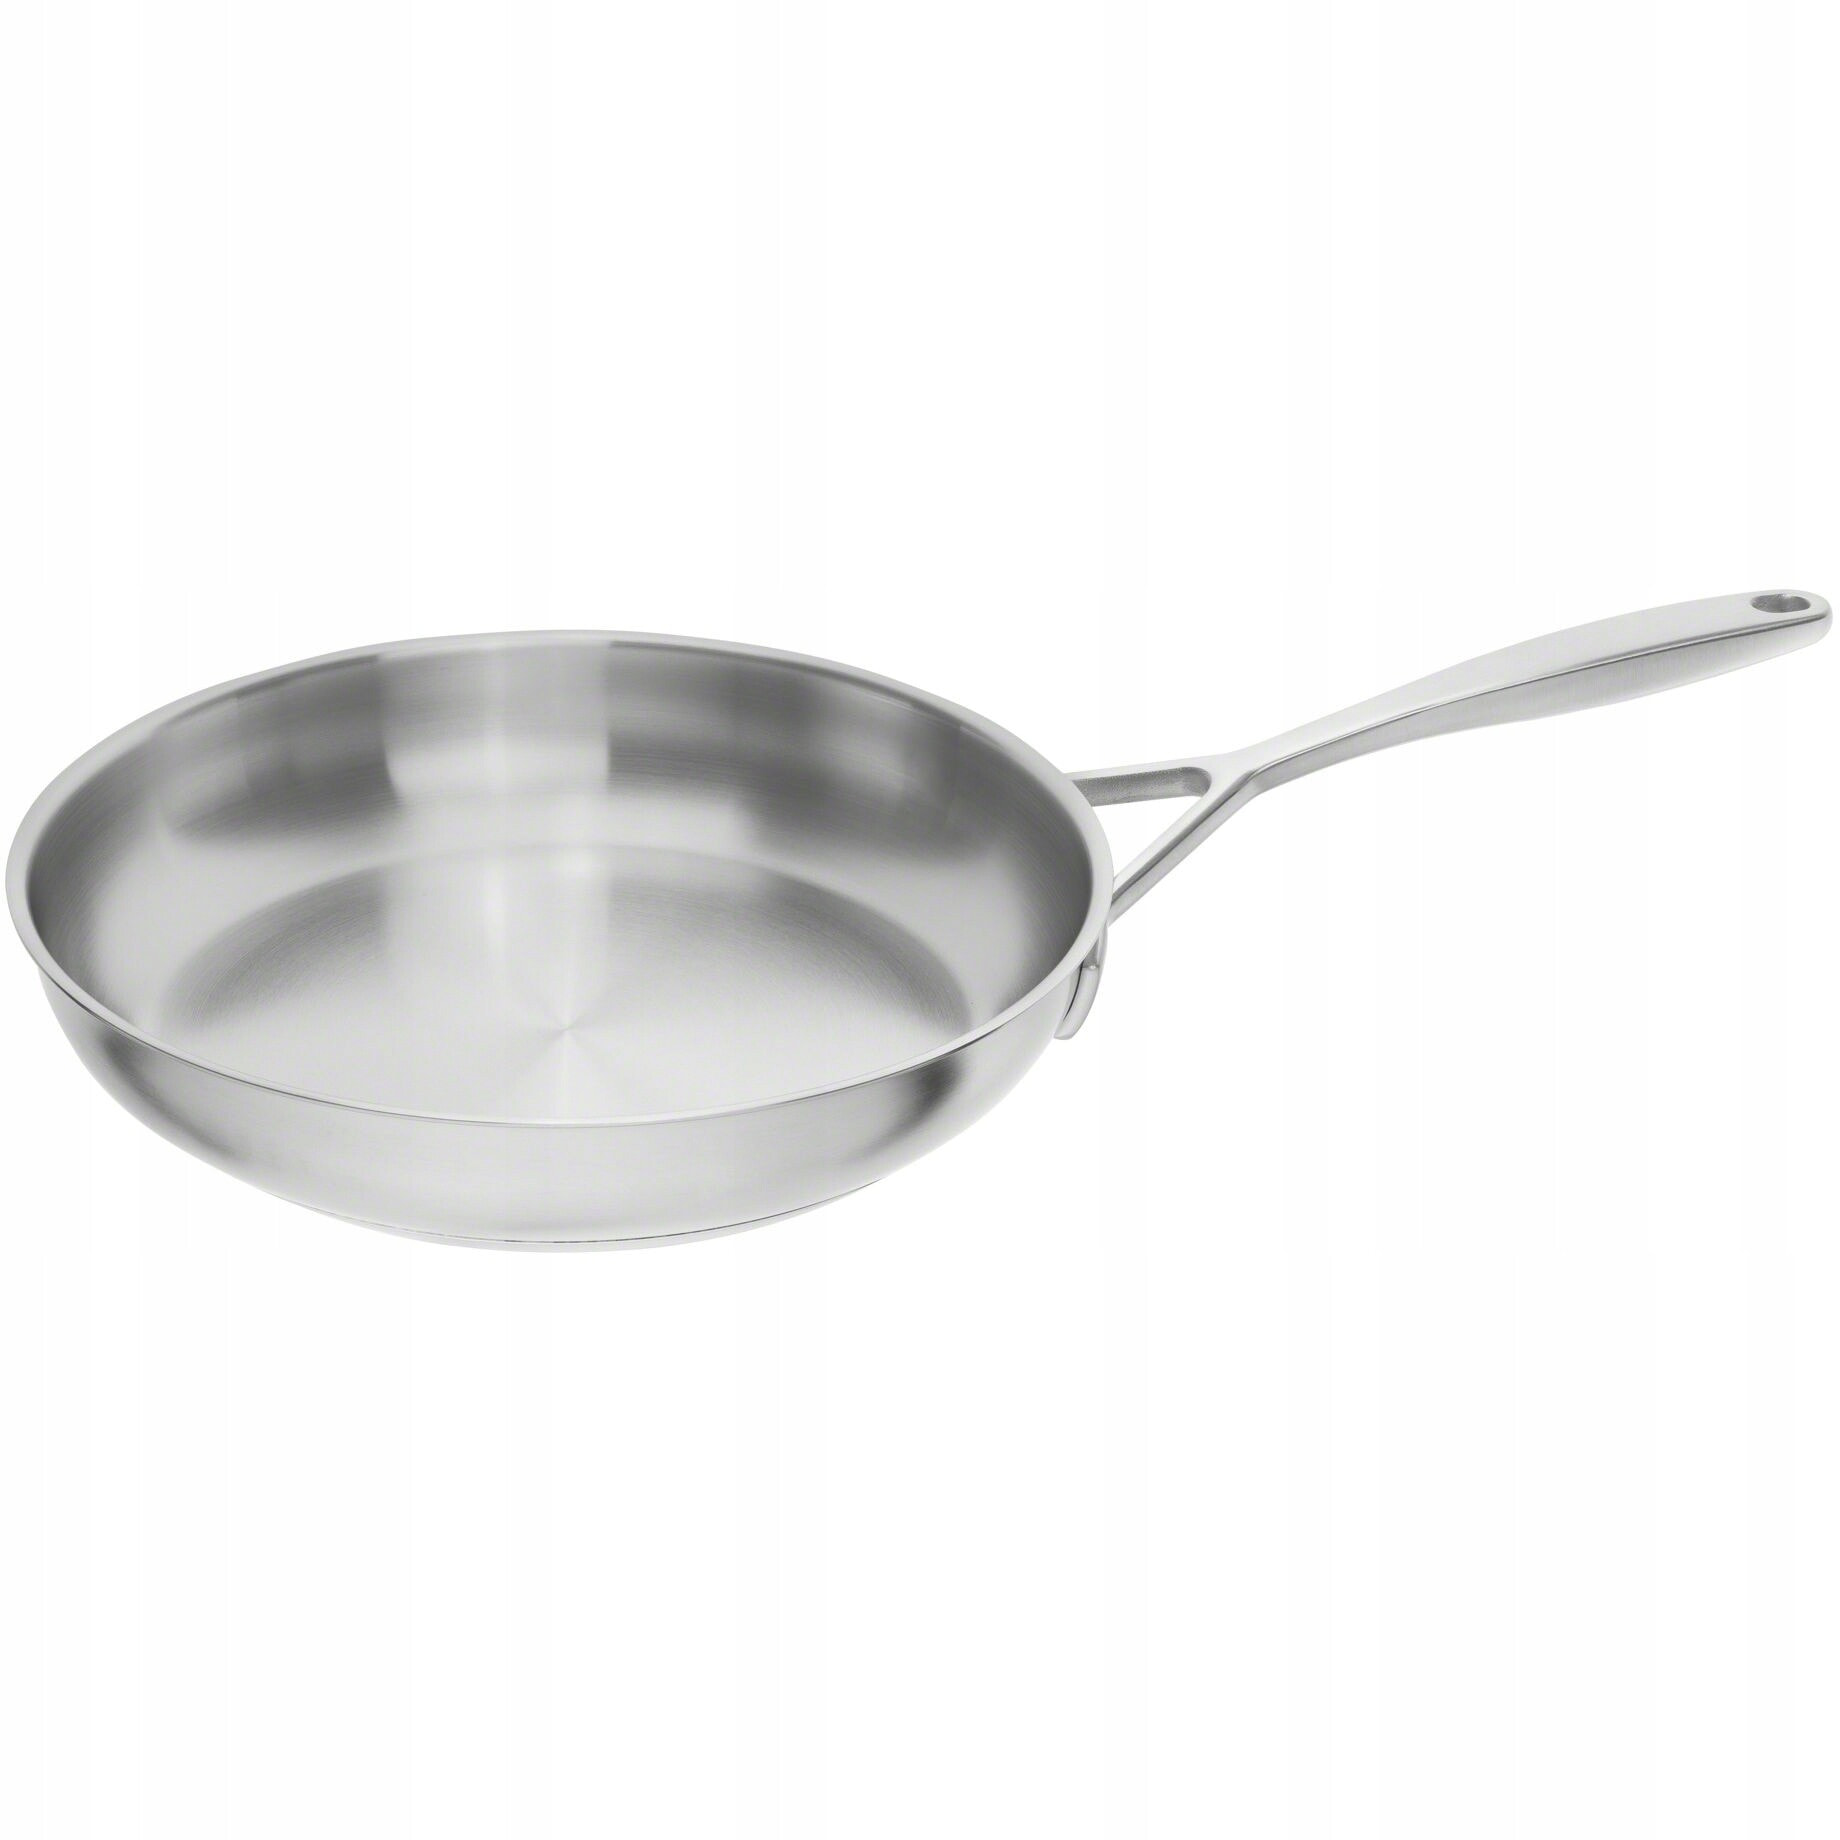 Zwilling Tefal 66461-200-0 frying pan Round All-purpose